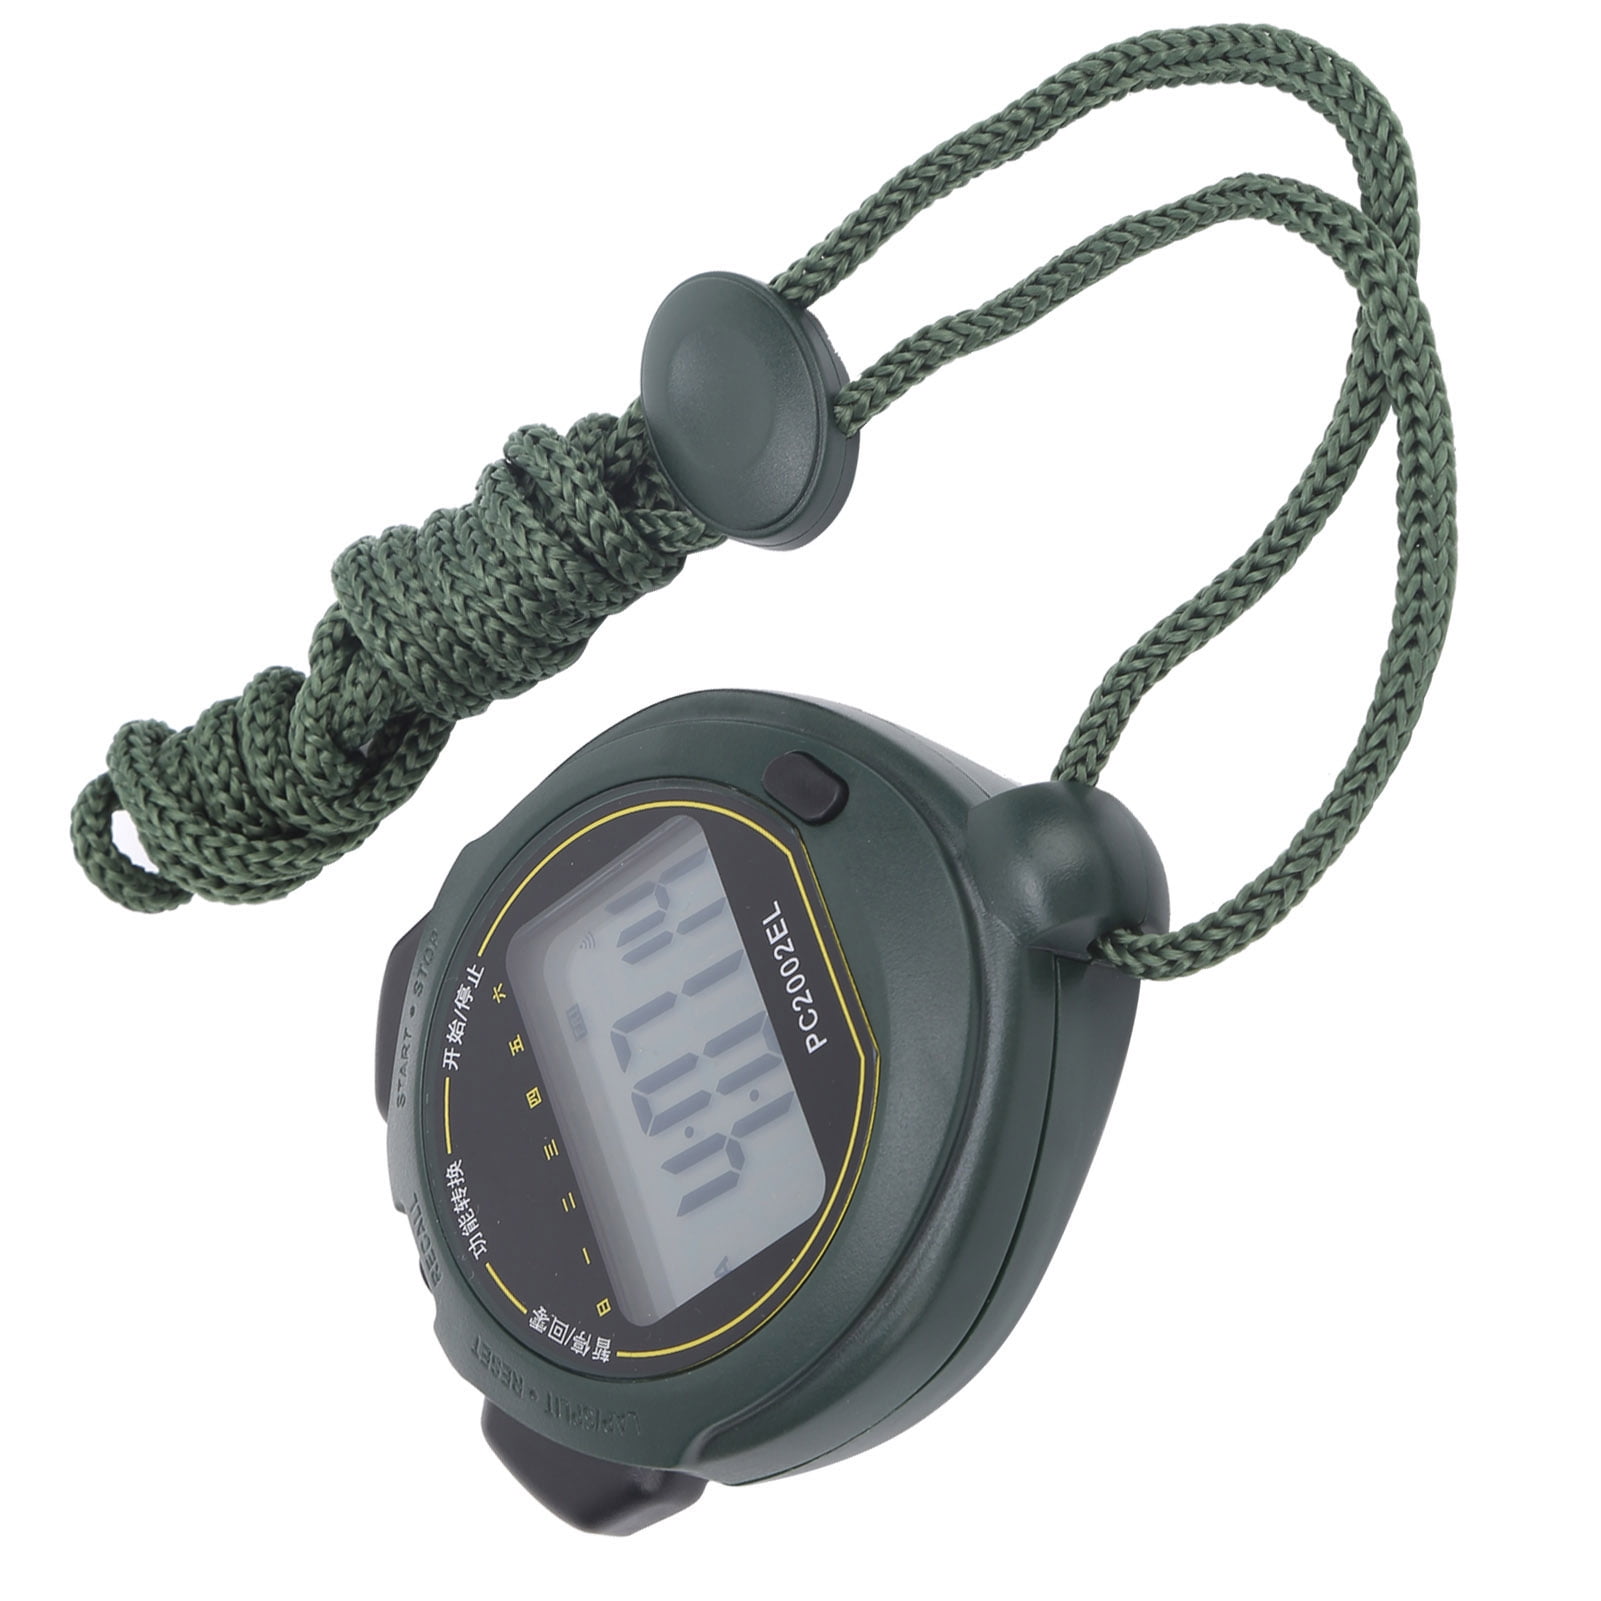 Details about   Multi-use Electronic Stopwatch Waterproof Screen Single Row Display 2 Track New 